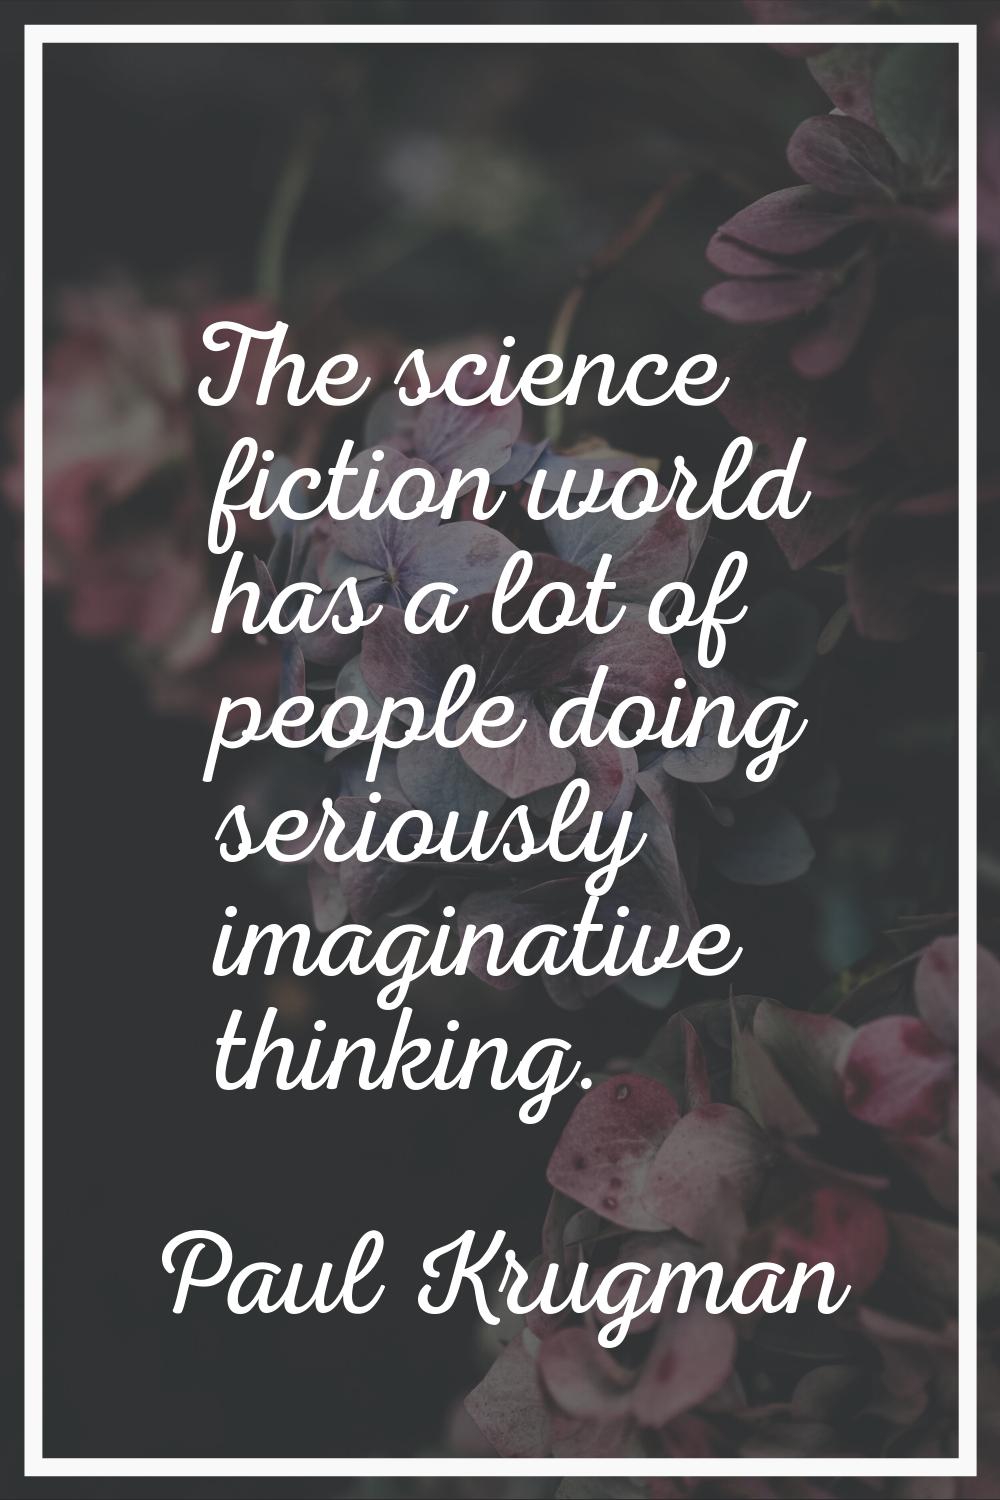 The science fiction world has a lot of people doing seriously imaginative thinking.